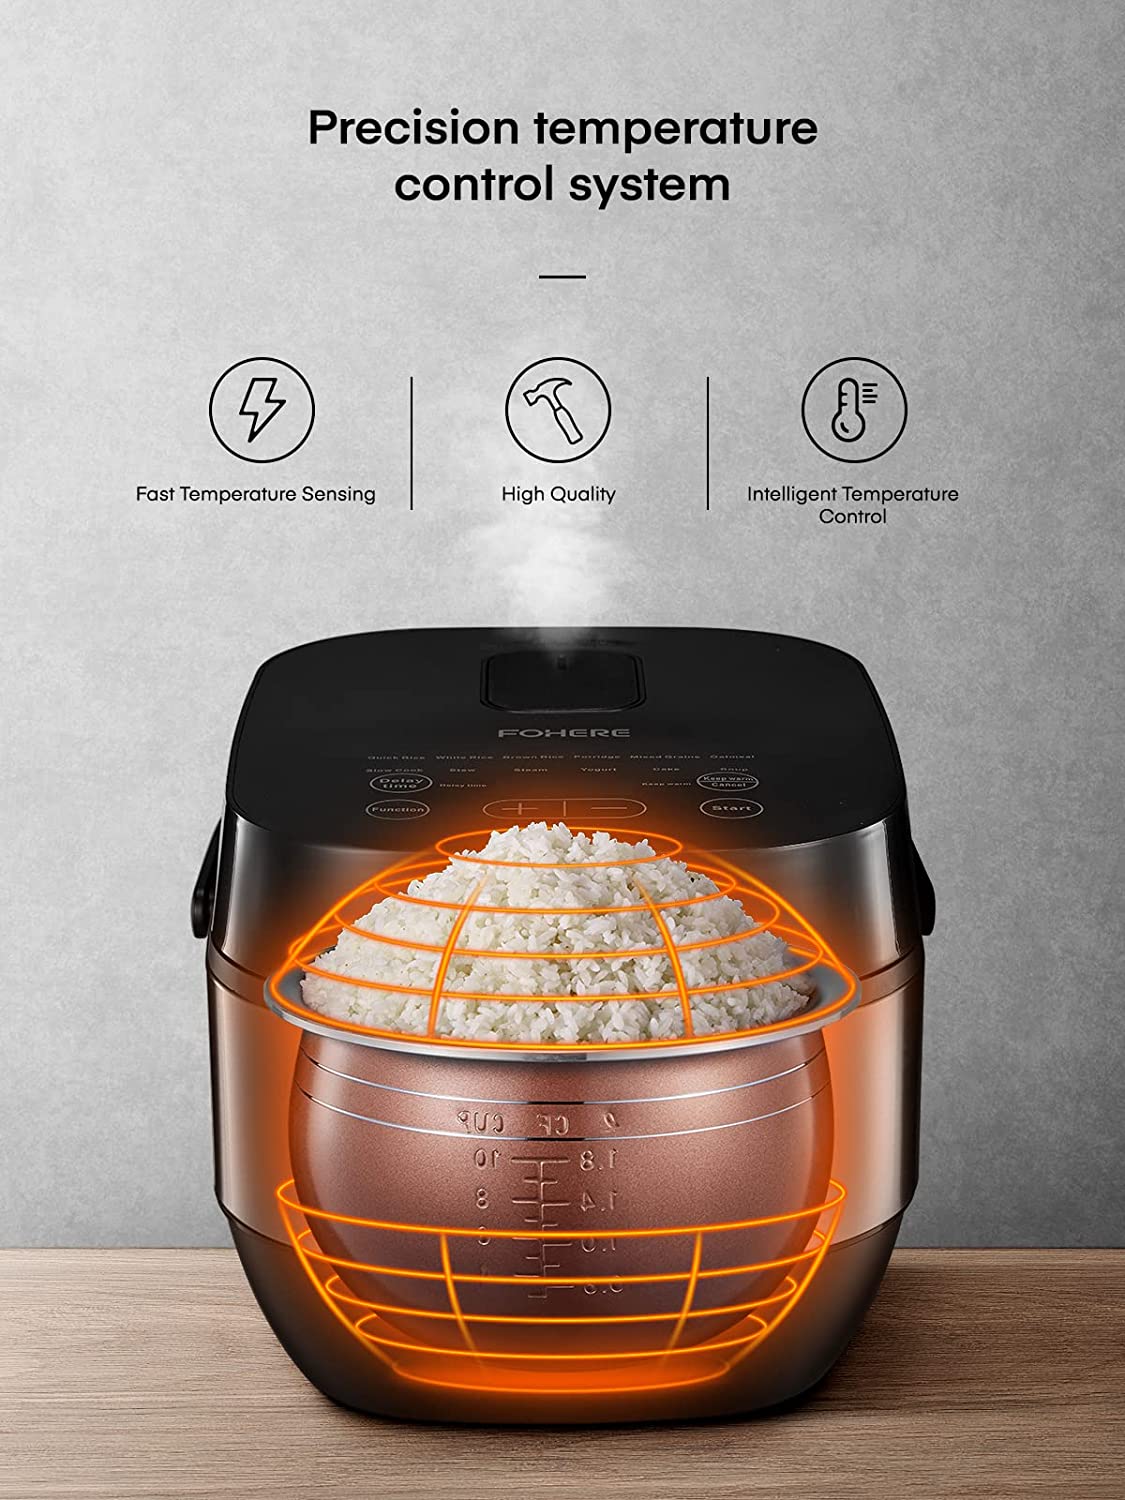 precision temperature control system, Rice Cooker, Food Steamer, Slow cooker, All in One Digital Programmable Rice Cooker with 10 Preset Programs, Large Capacity for 10-Cup Uncooked Rice, Auto Warmer and 24 Hours Delay Timer, Recipe